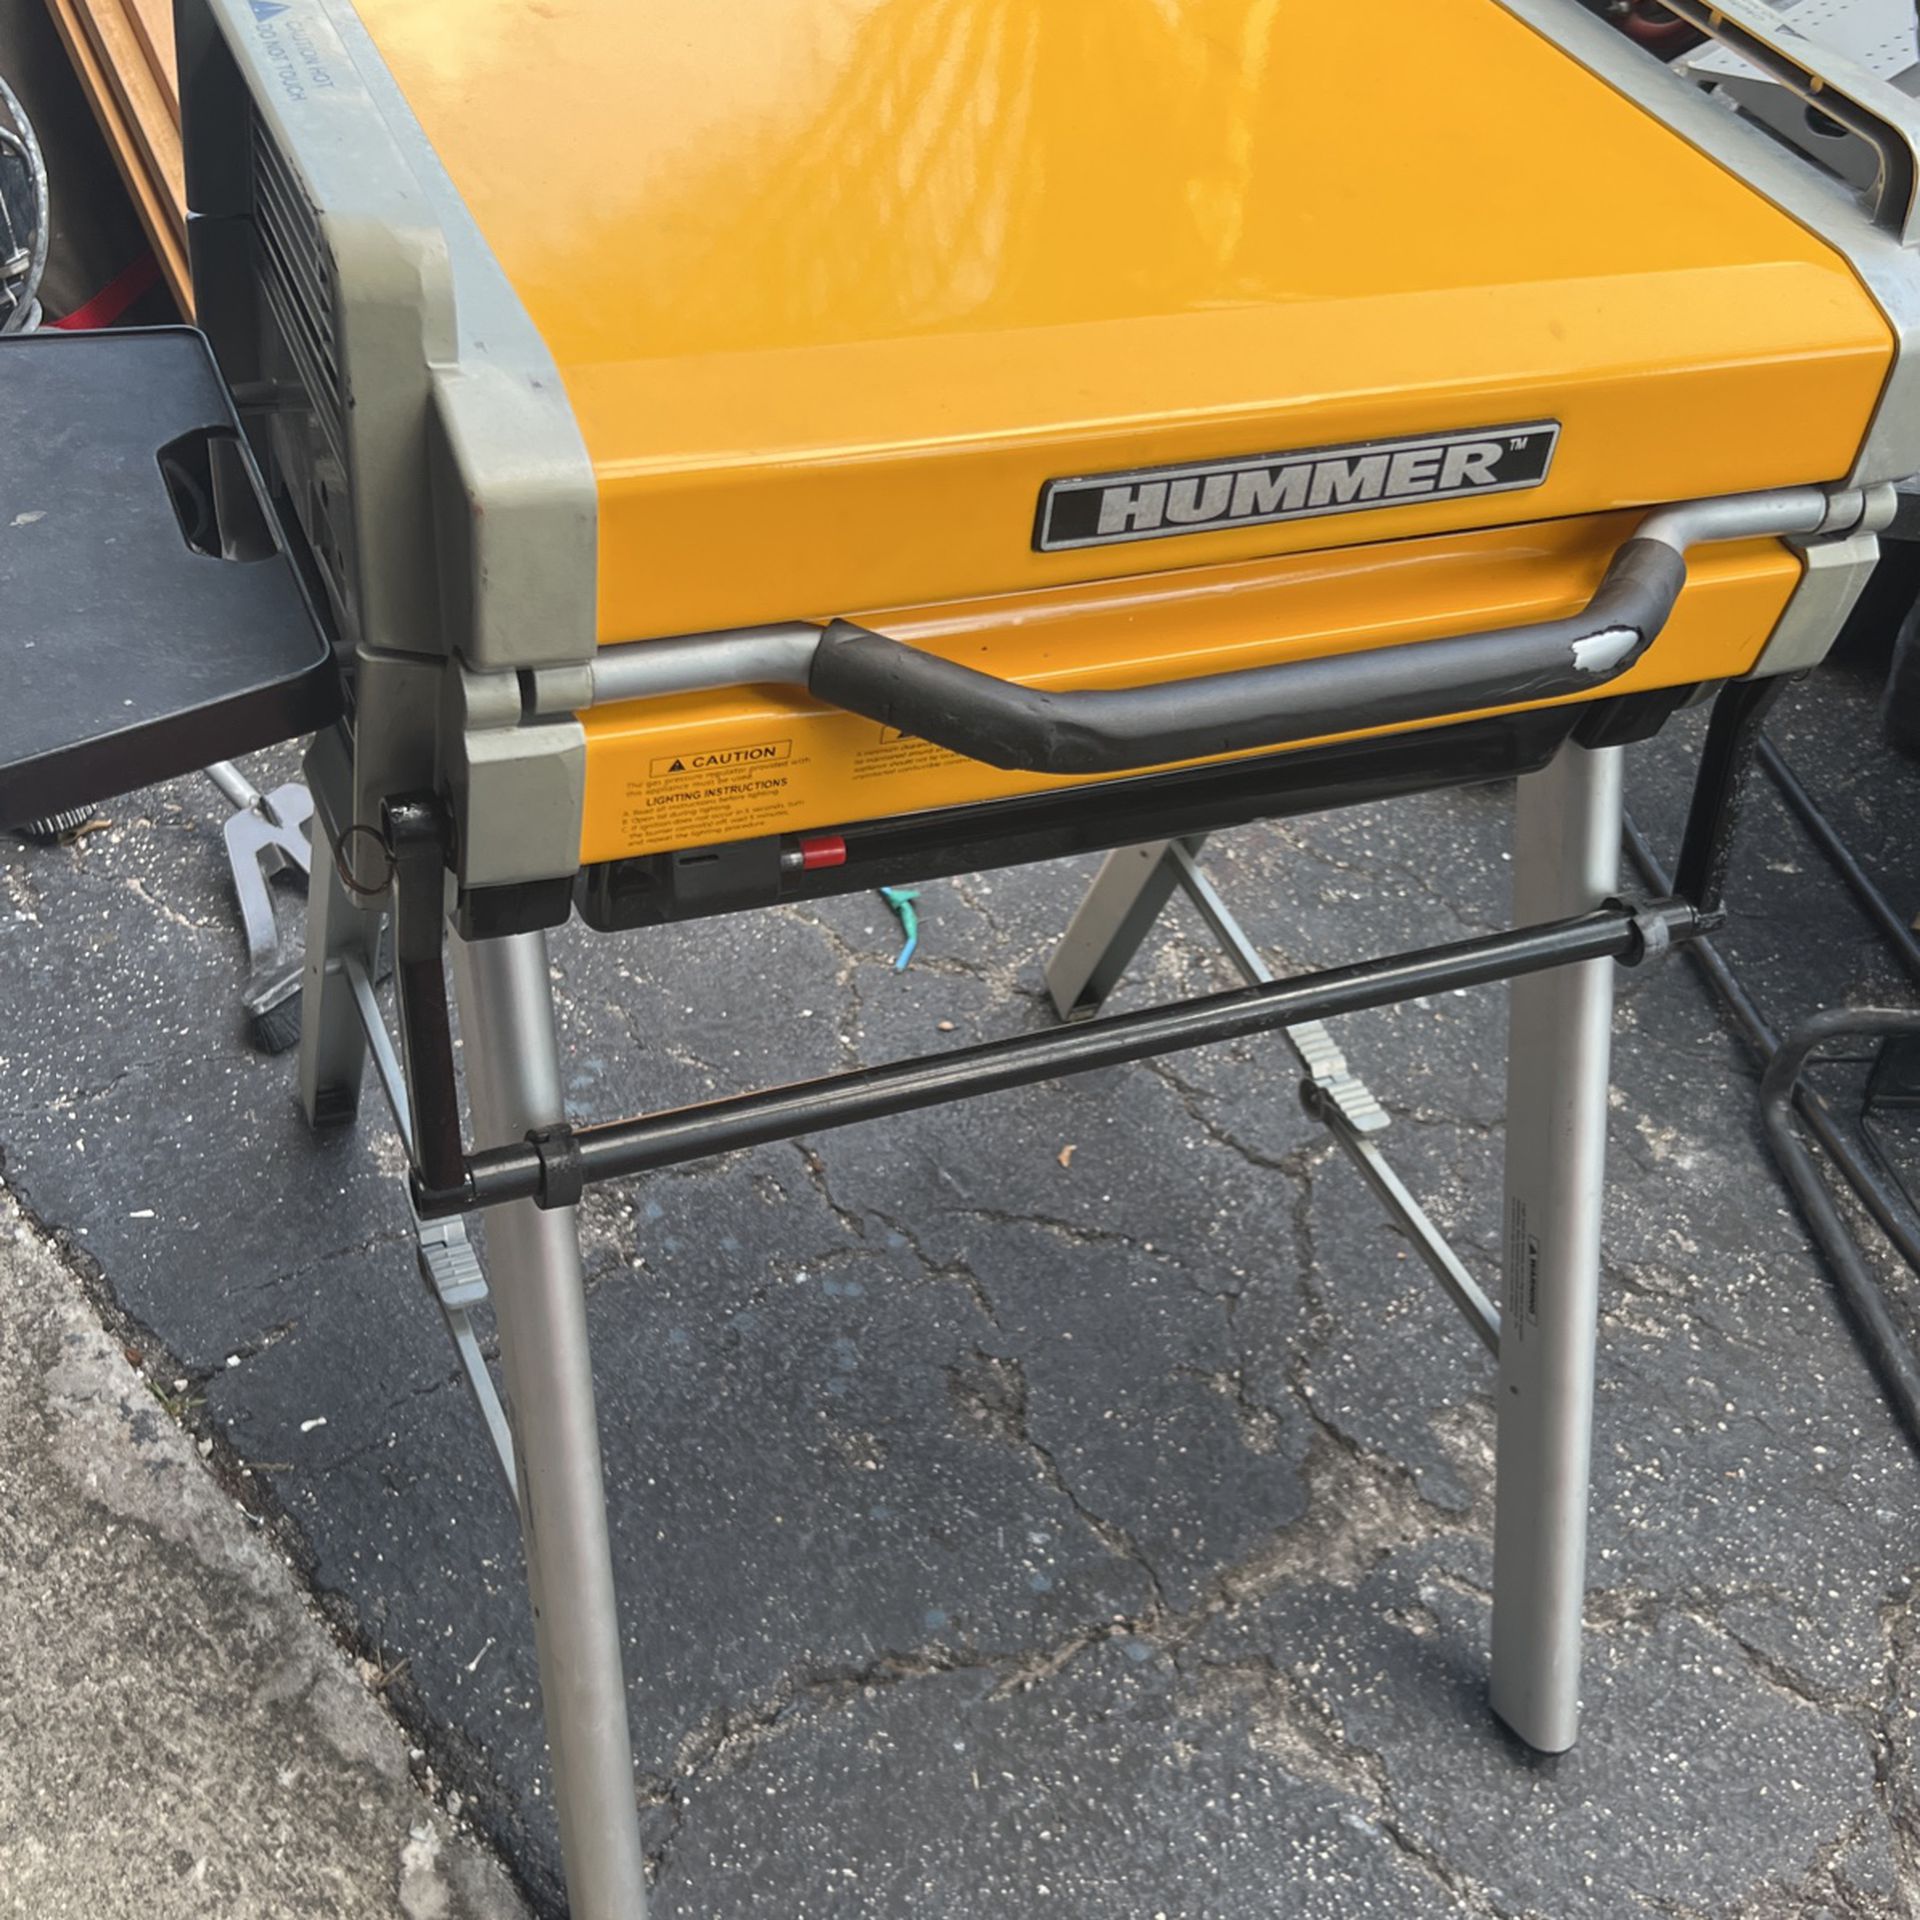 Philips Smokeless Grill for Sale in Miami Beach, FL - OfferUp